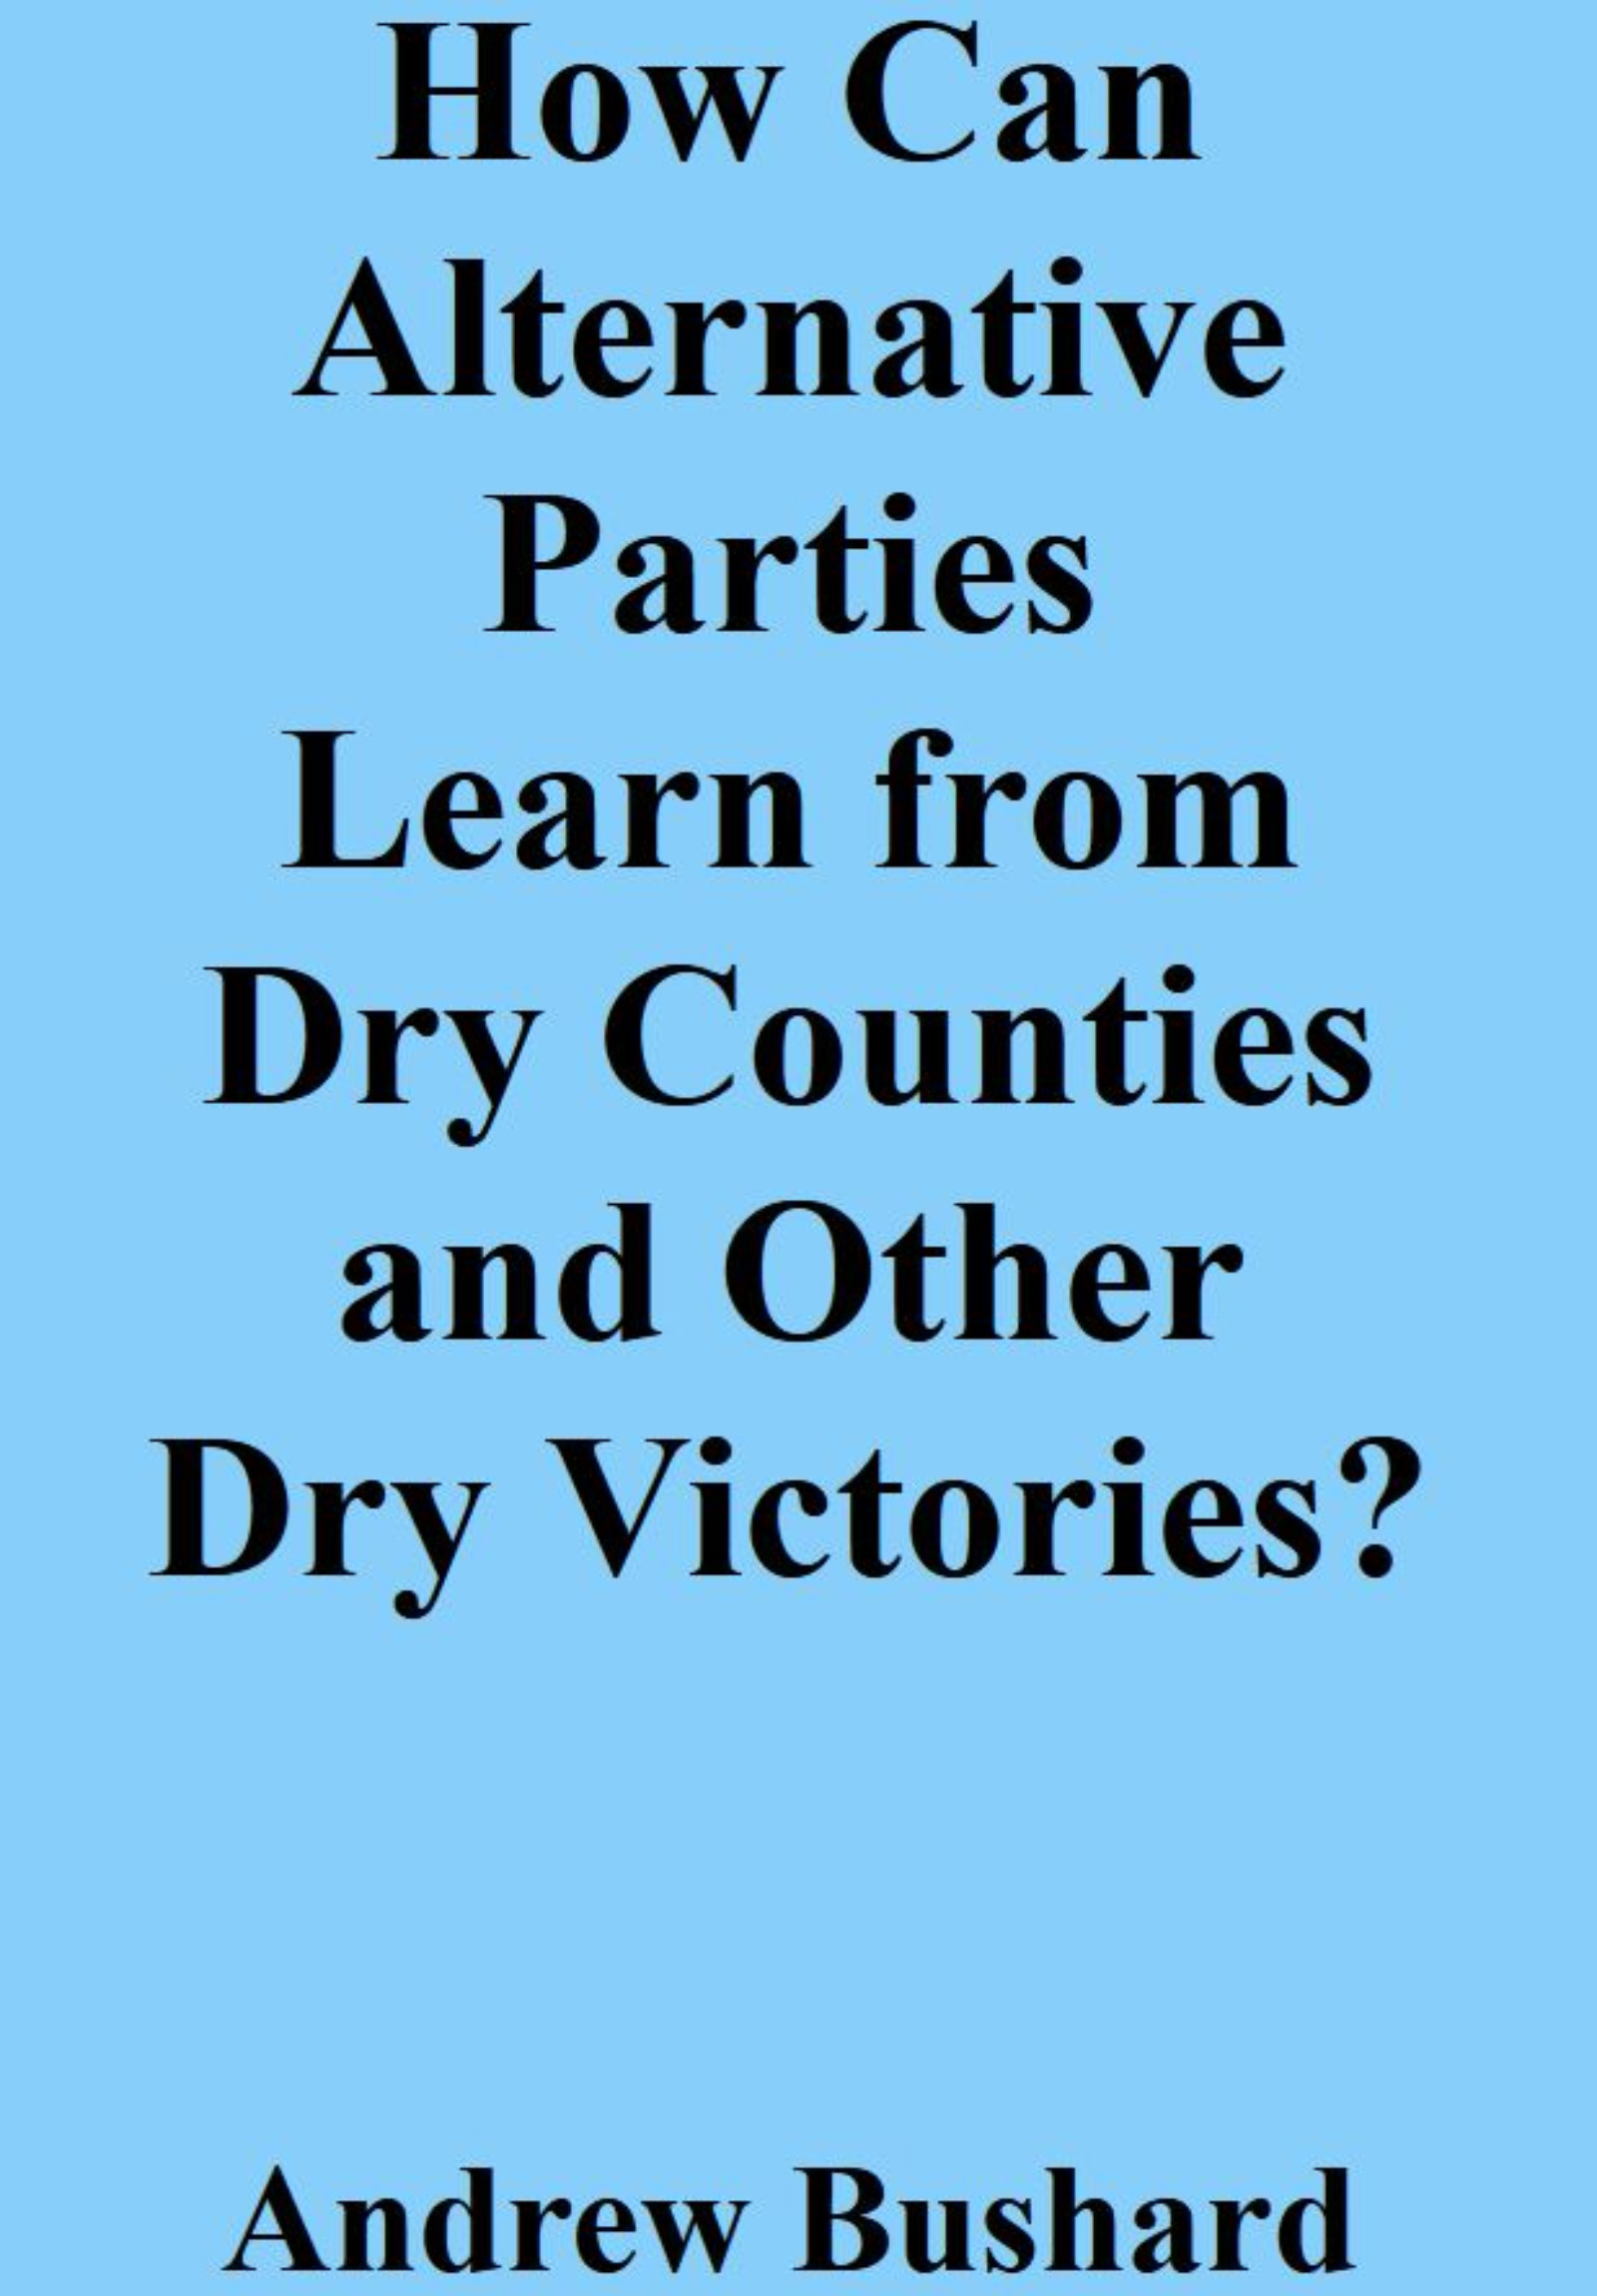 How Can Alternative Parties Learn from Dry Counties and Other Dry Victories?'s featured image